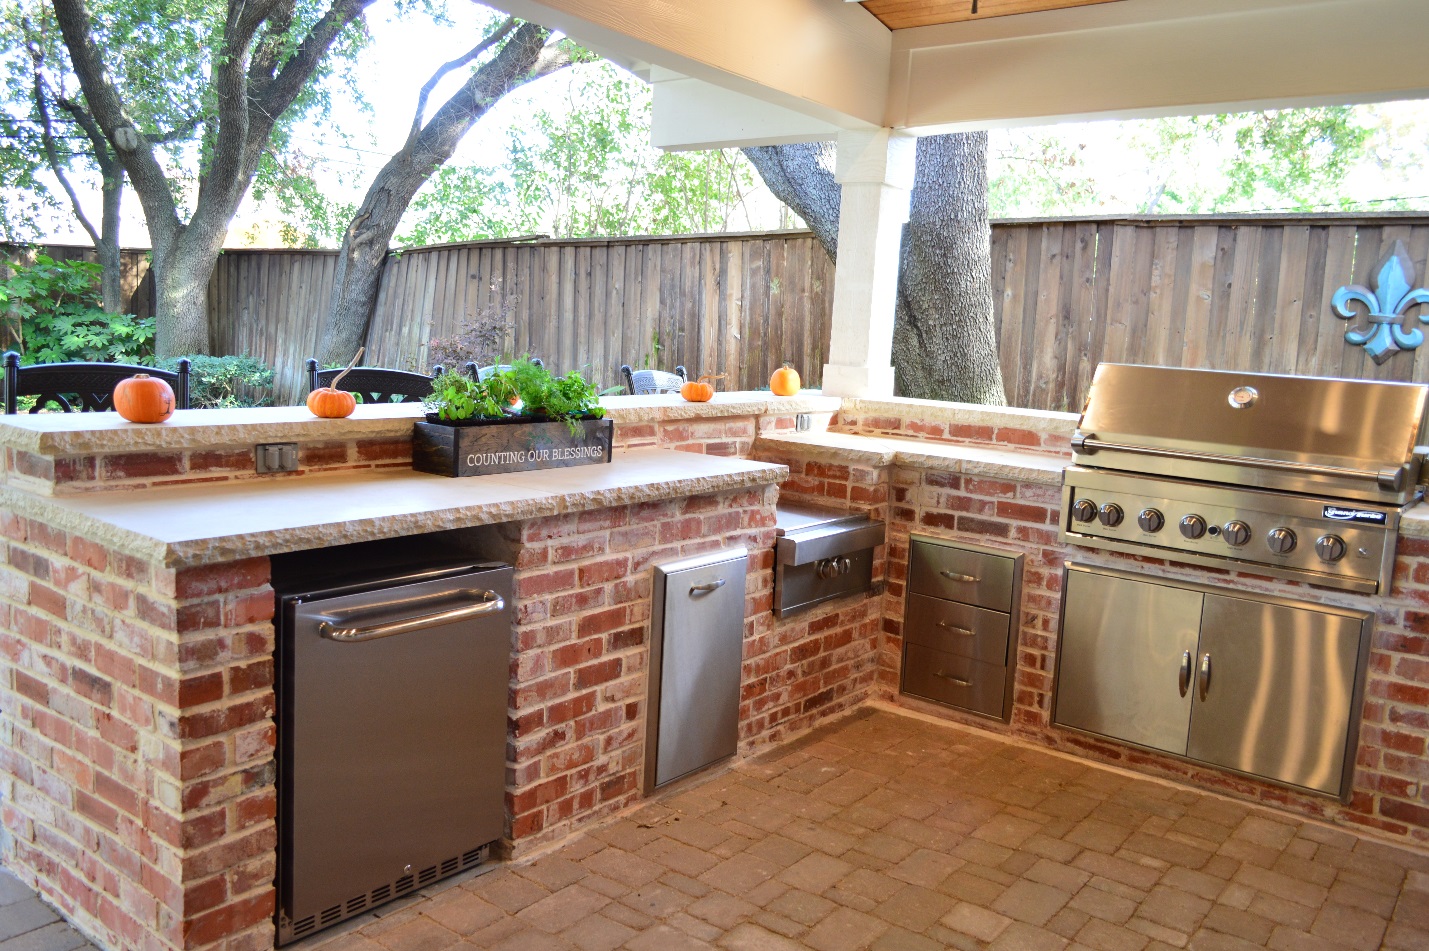 Archadeck of Northeast Dallas-Southlake, your outdoor kitchen builder.